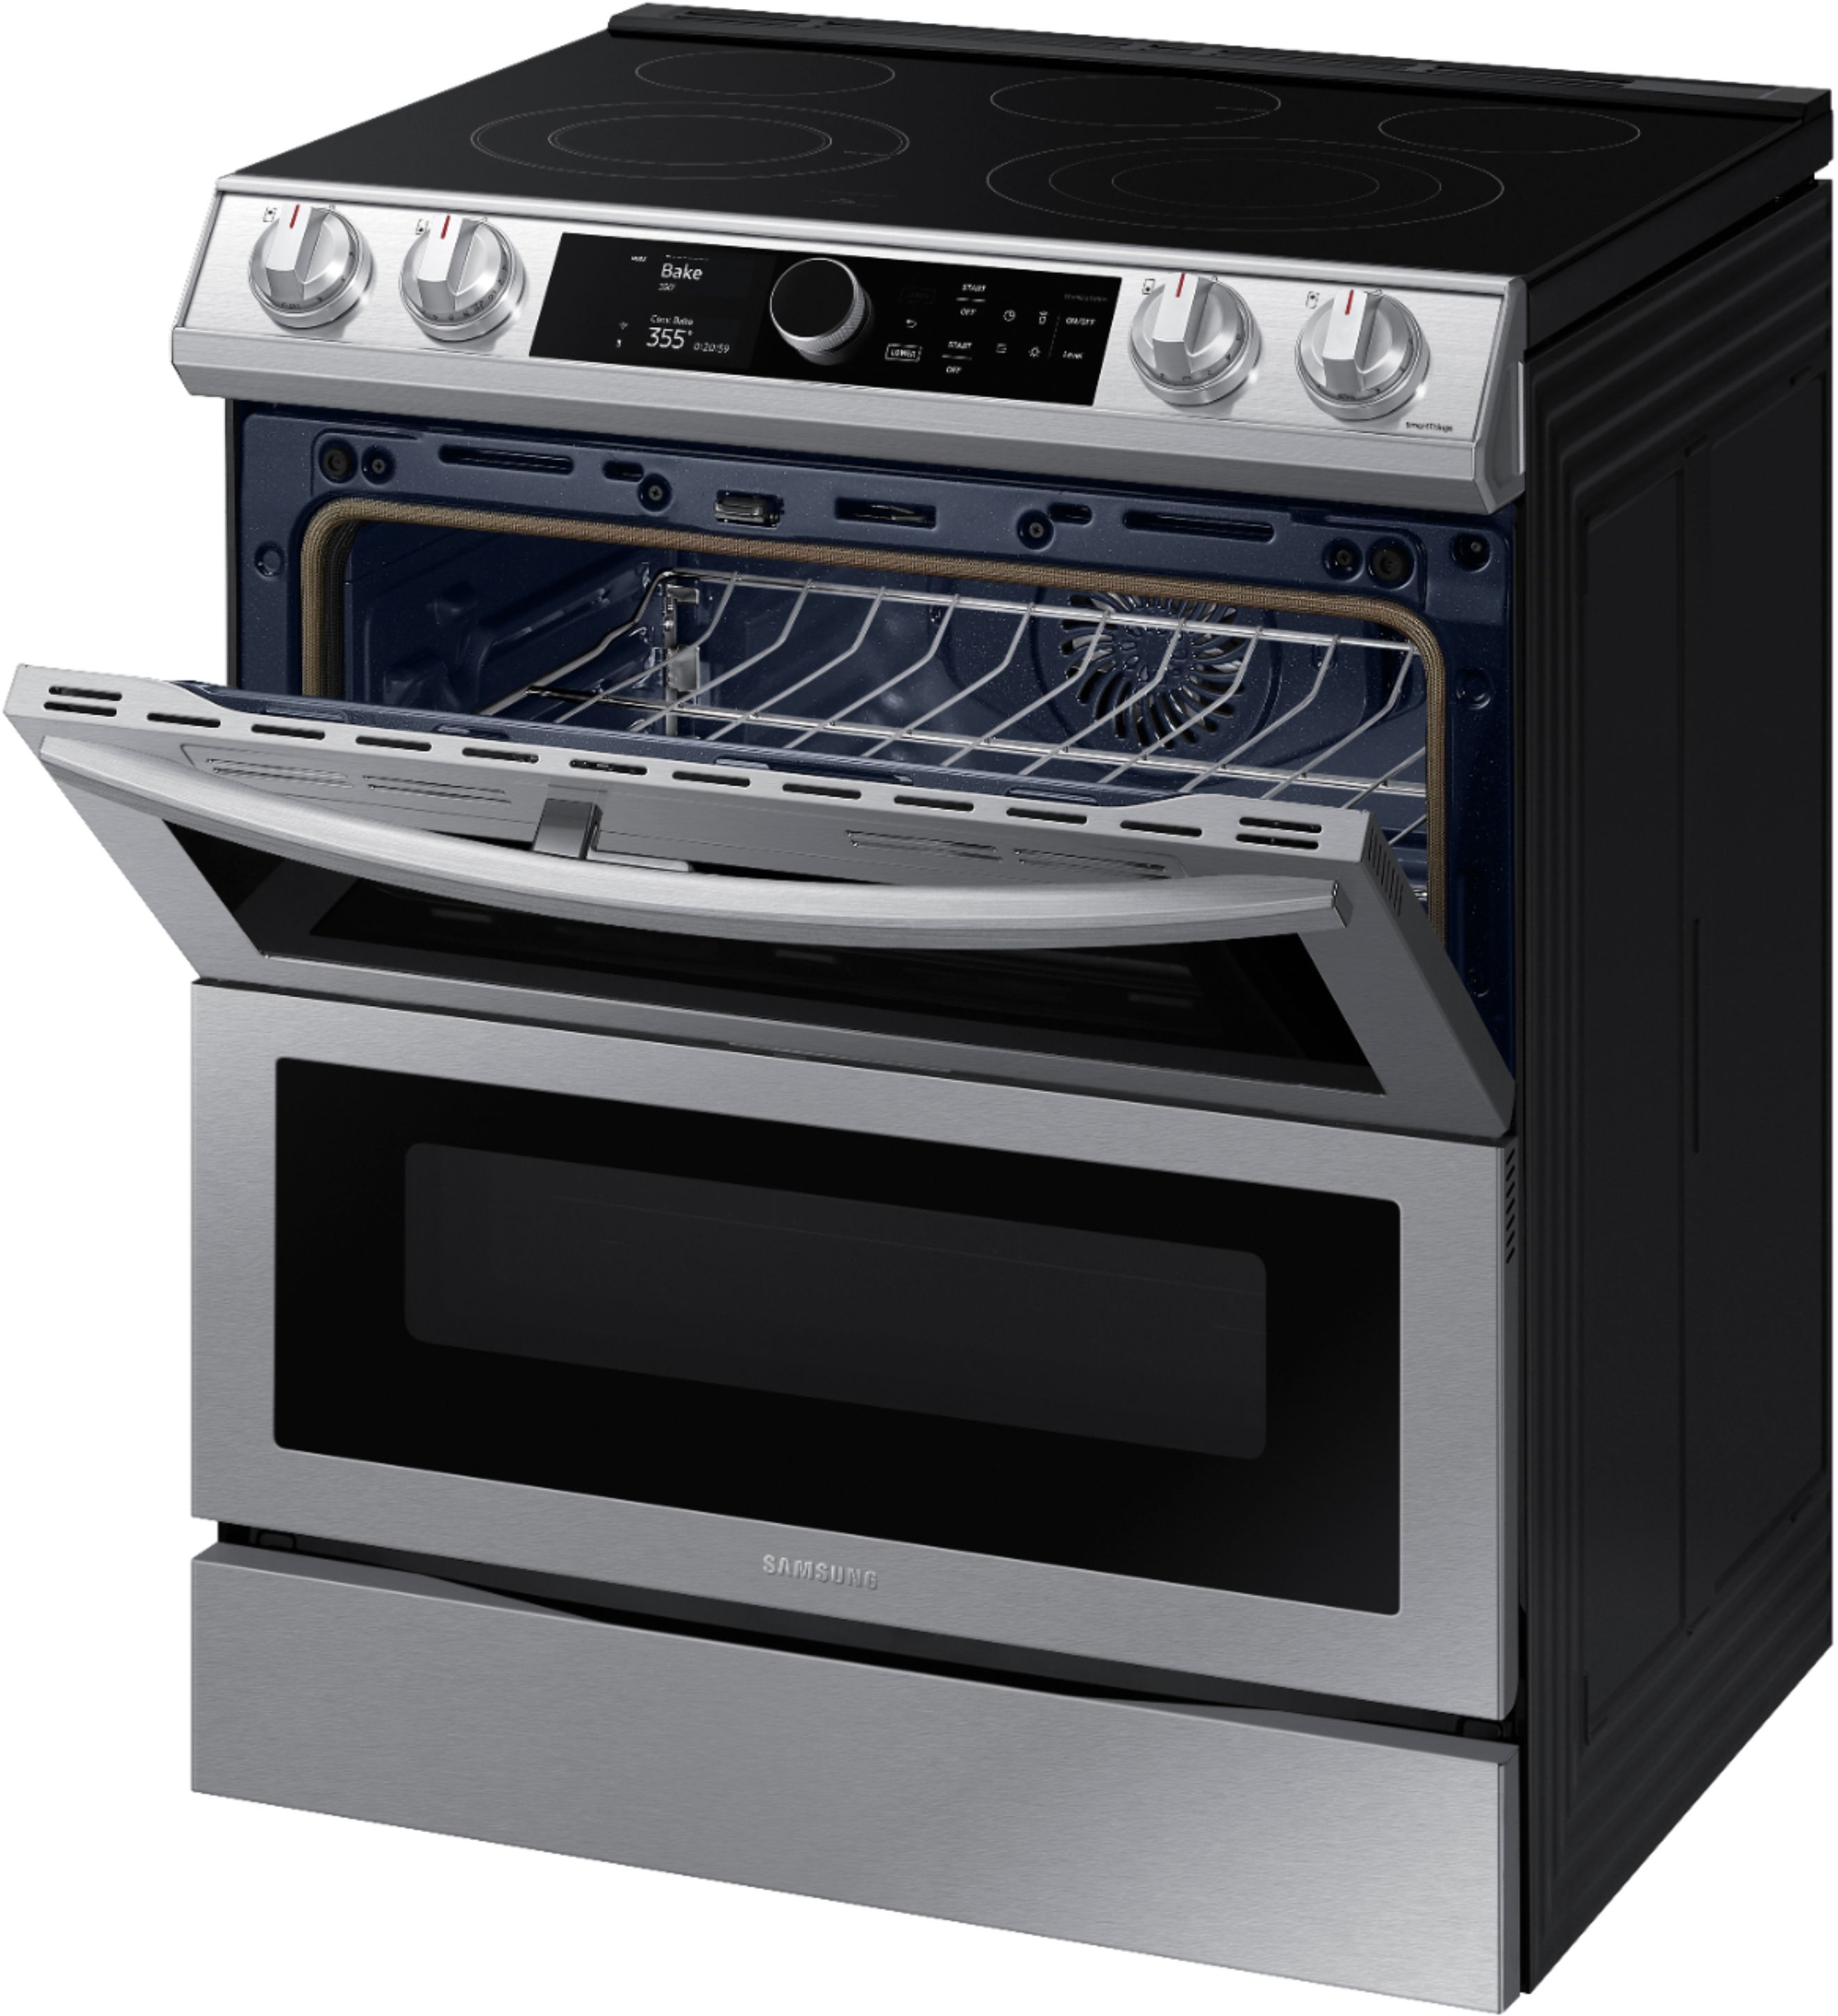 Samsung 6.3 cu. ft. Flex Duo™ Front Control Slide-in Electric Range Samsung Stainless Steel Electric Stove